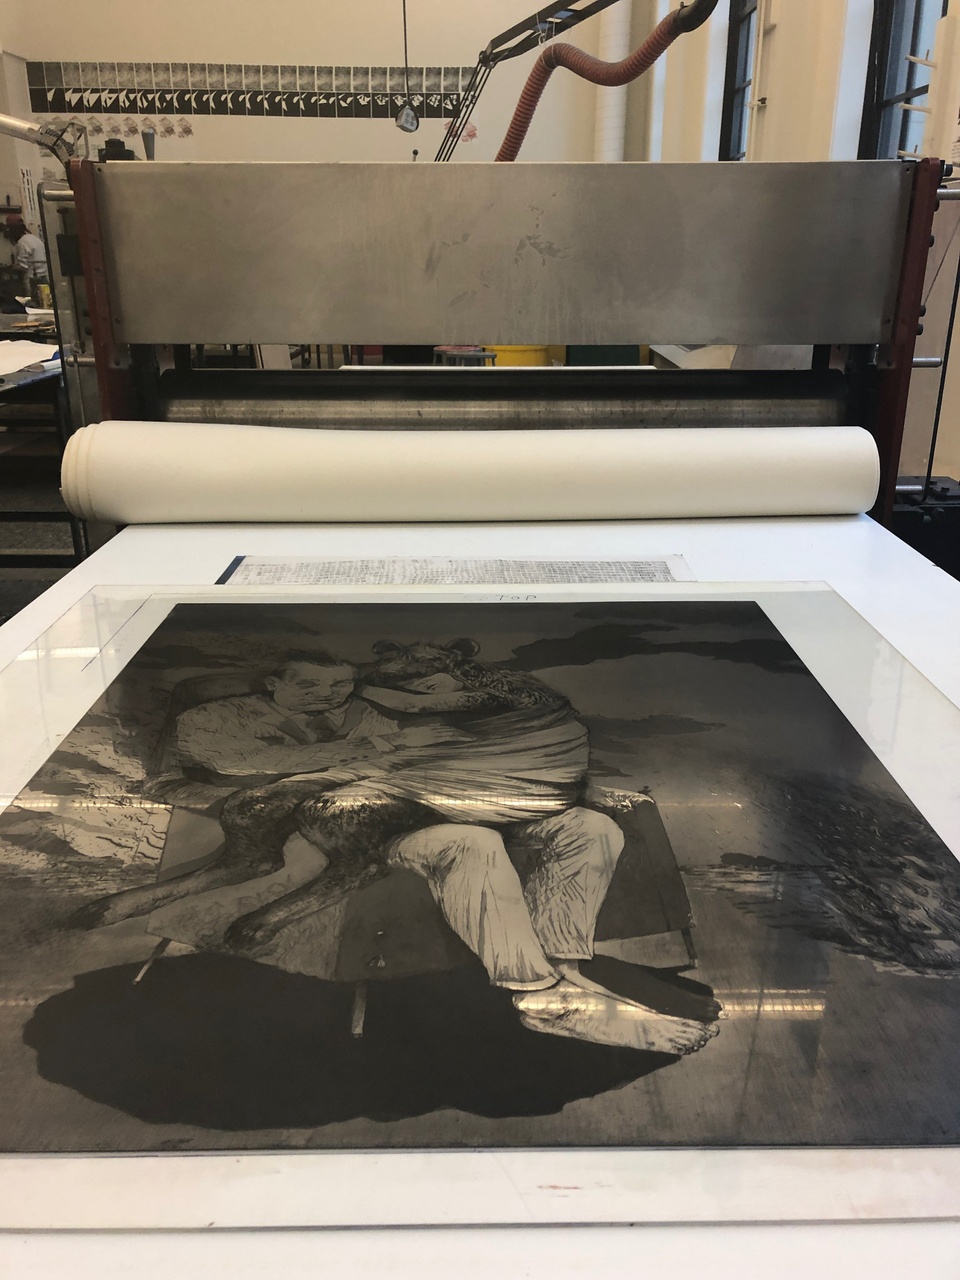 Large inked etching plate on bed of printing press.